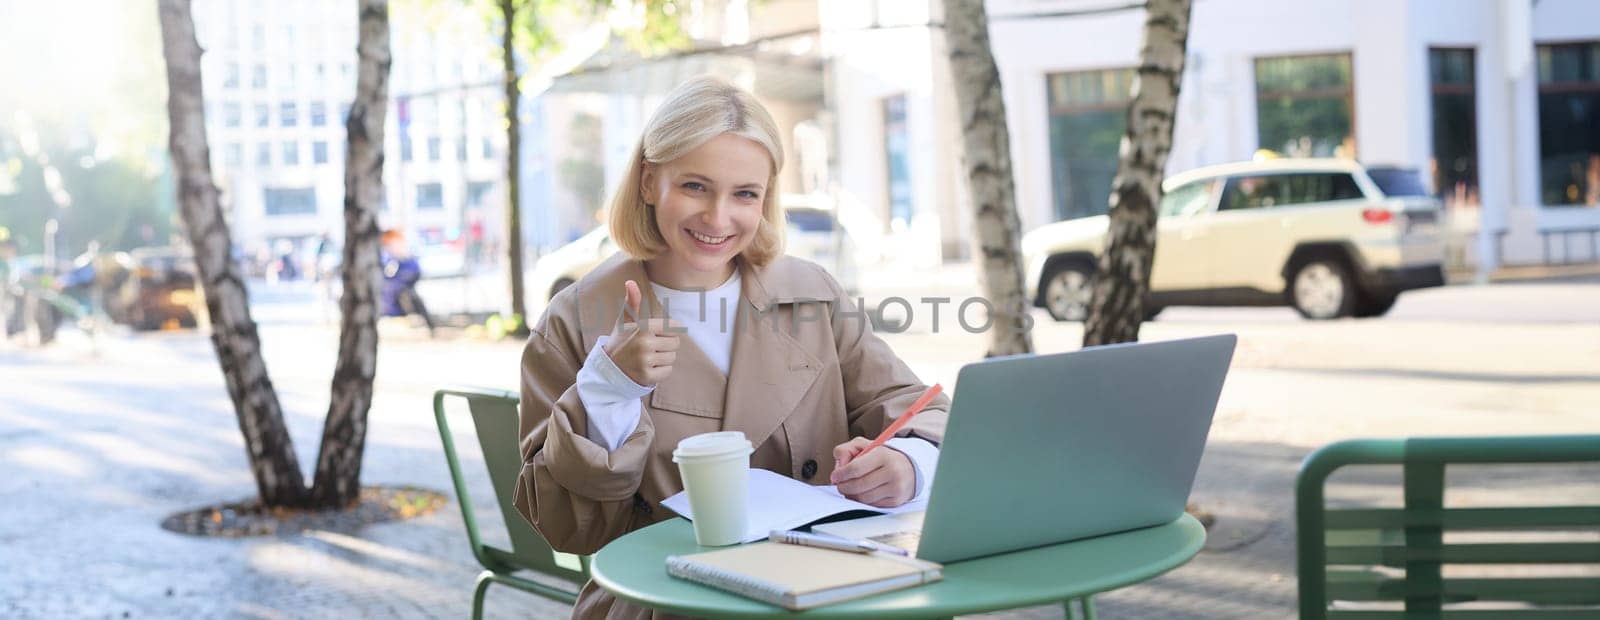 Portrait of beautiful blond female model, showing thumbs up, sitting with laptop and study material in coffee shop, gives approval. Lifestyle concept